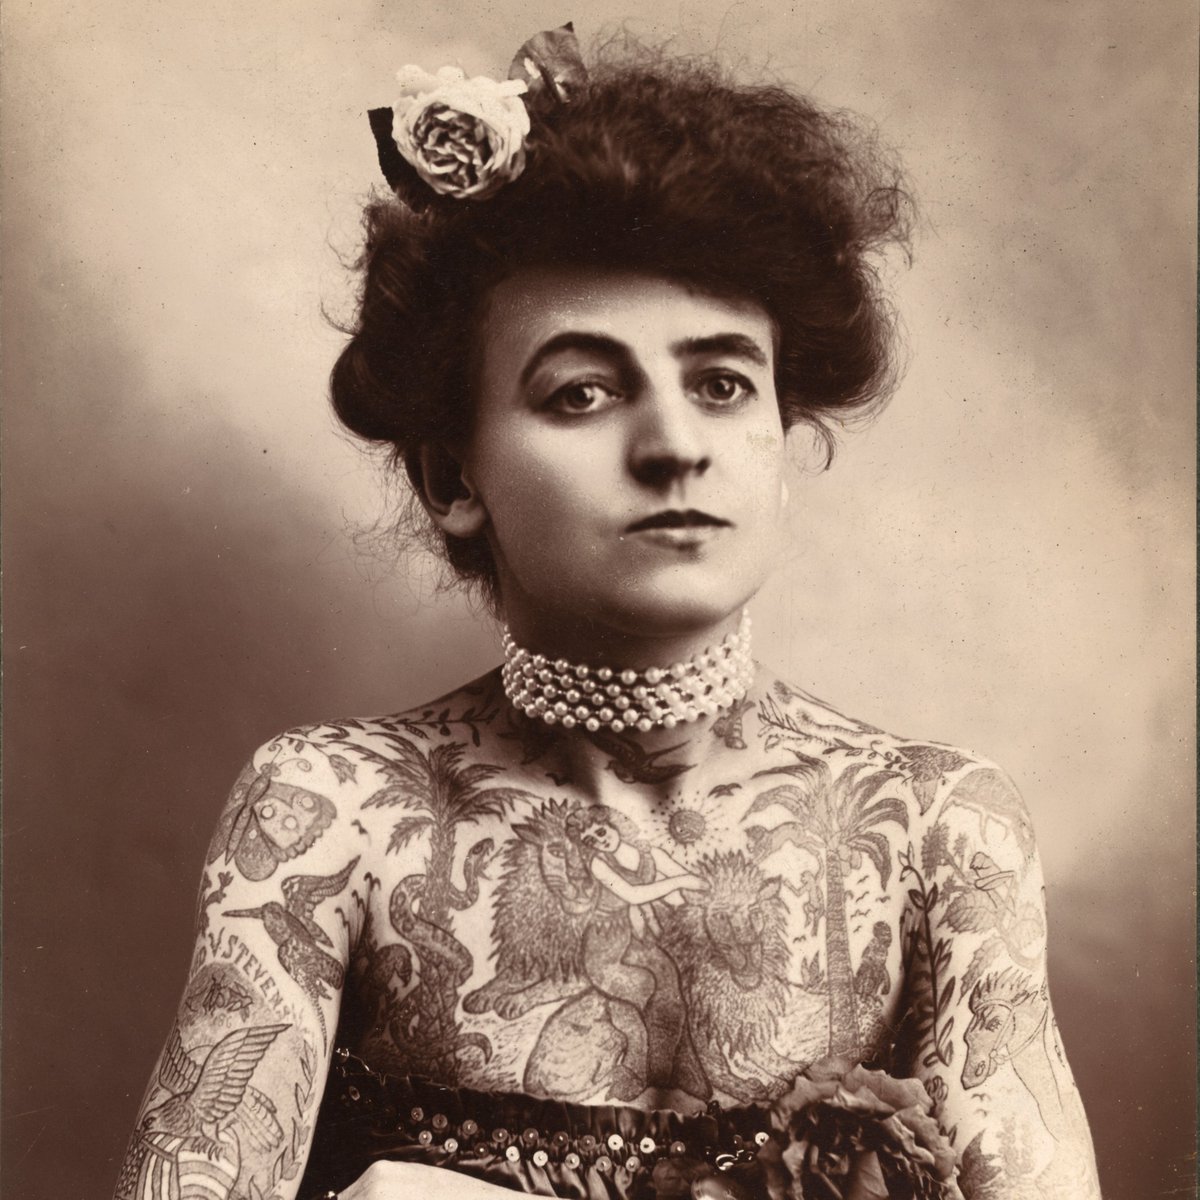 Maud Wagner (February 1877 – January 30, 1961). Maud joined a traveling circus to provide for herself as a teenager, and a chance meeting with a tattooed man would lead her to break the gender stigma around tattoos and to become the first woman tattoo artist in American history.